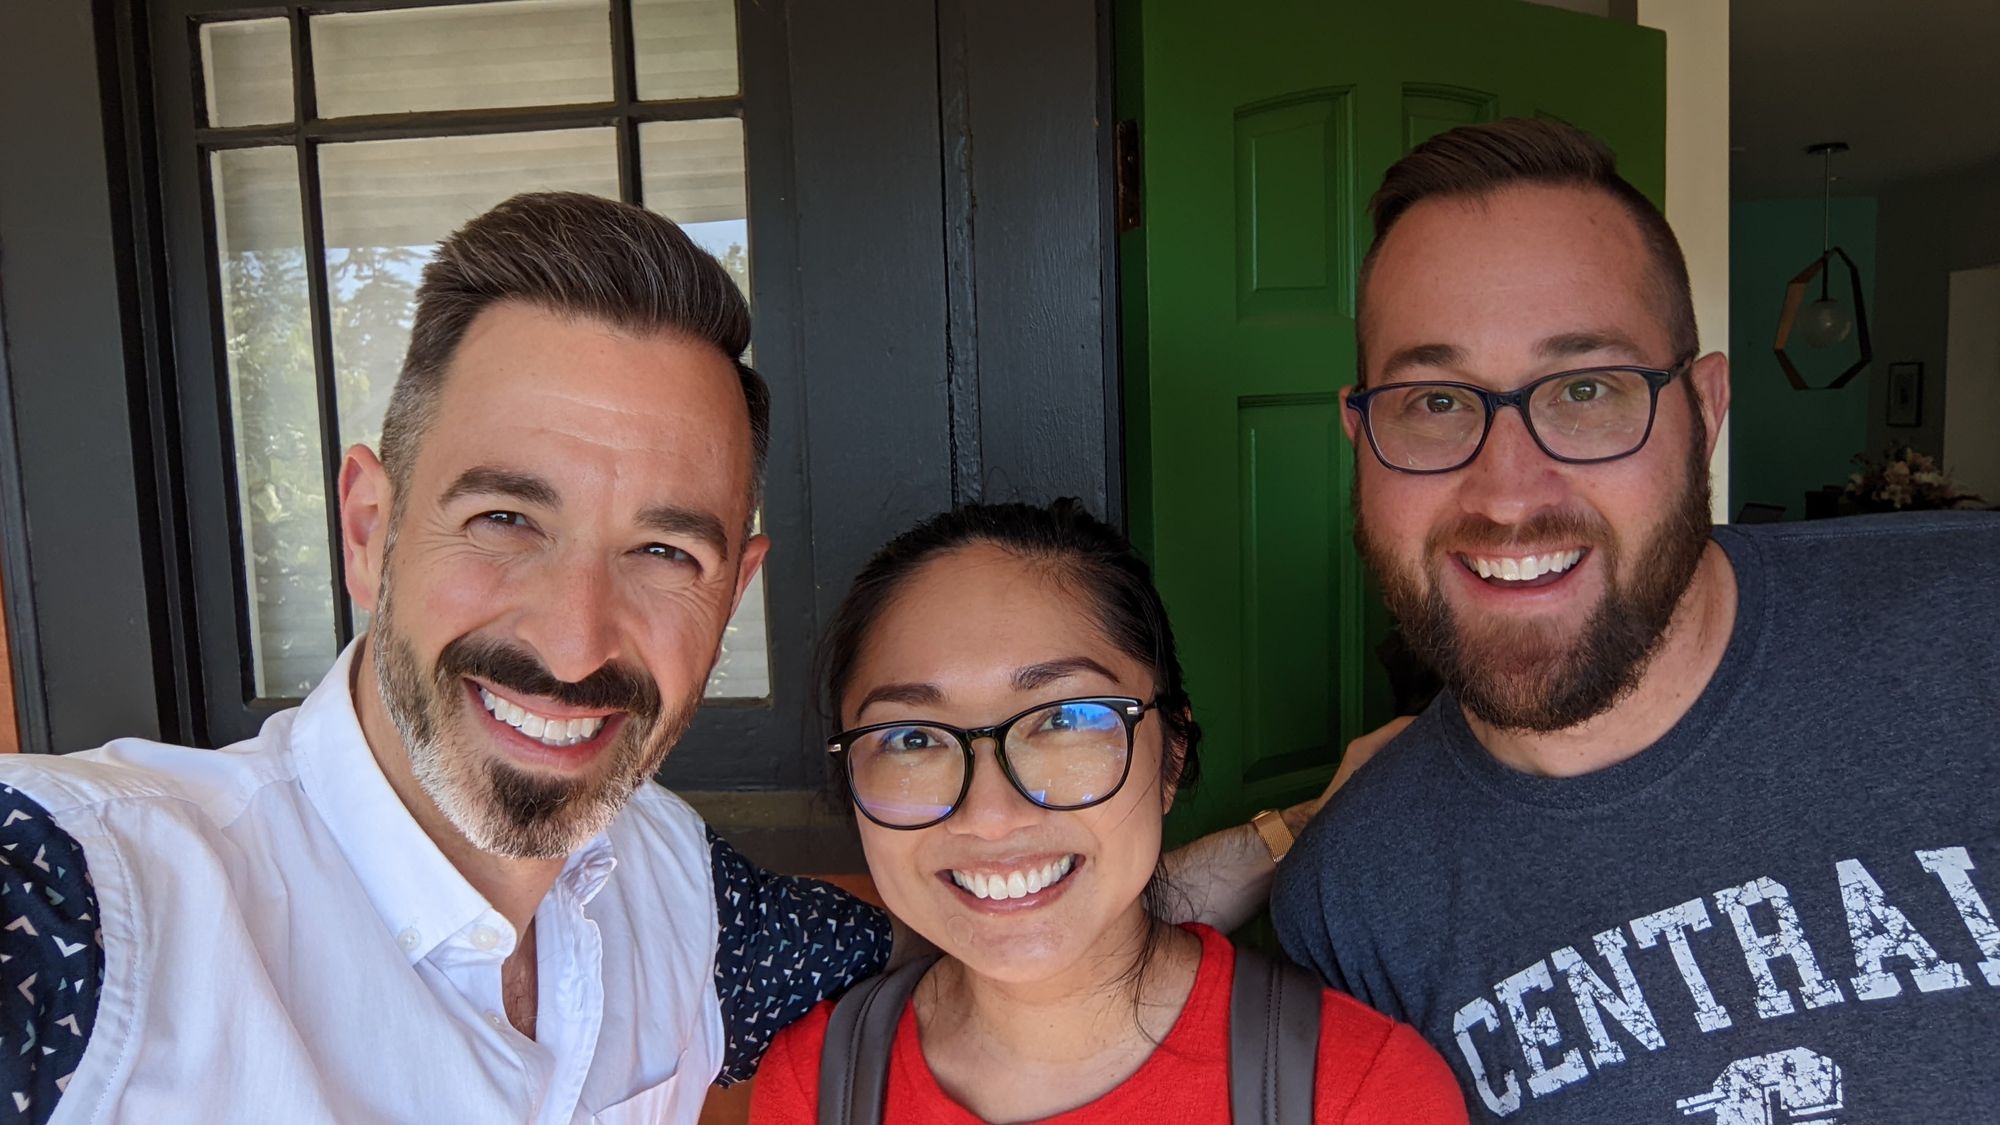 A photo shows Amanda and SparkToro's co-founders, Rand Fishkin and Casey Henry, smiling for a selfie. End description.